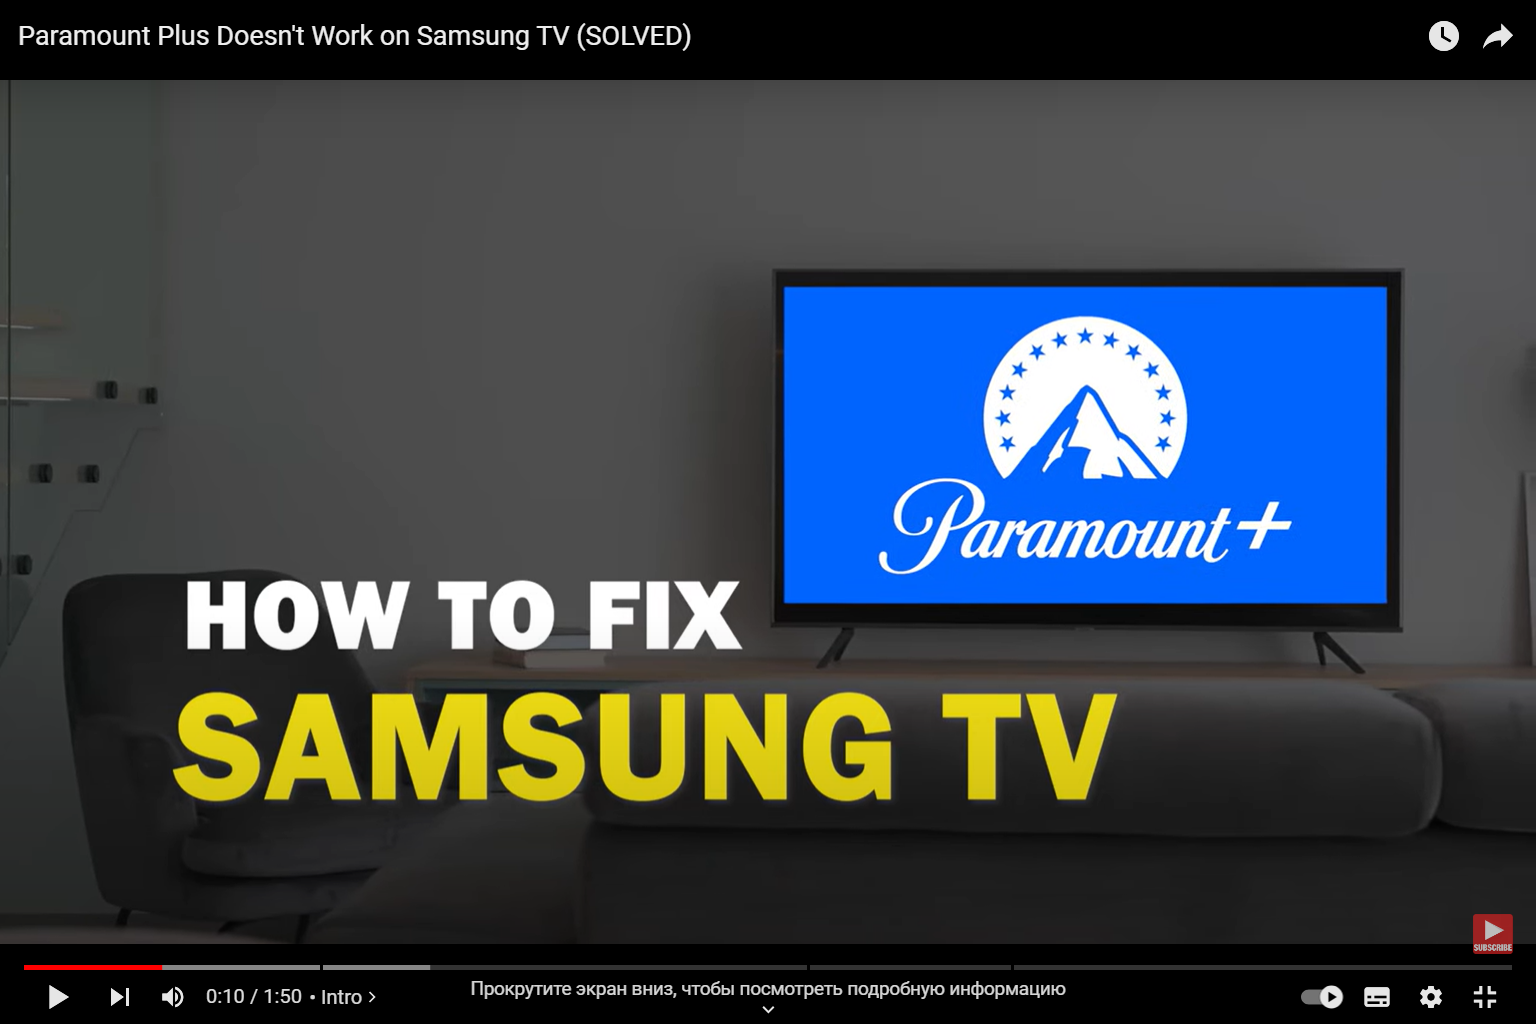 The inscription "How to fix samsung TV" on the background of TV